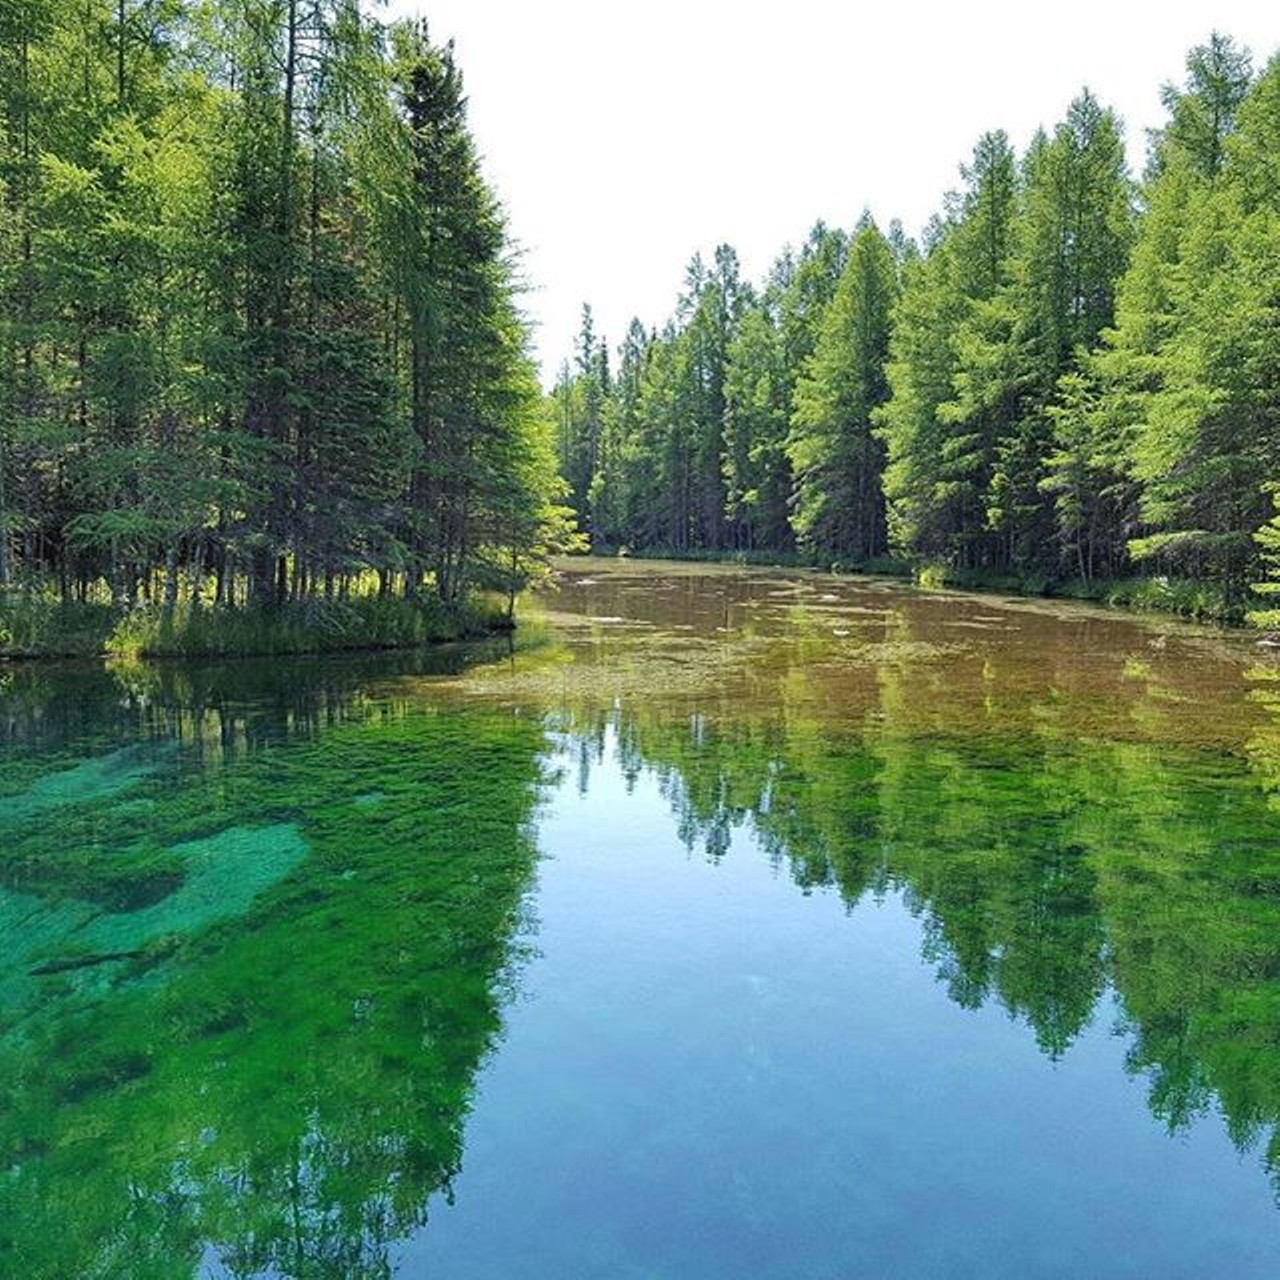 Kitch-iti-kipi, Manistique
Previously named &#145;Mirror of Heaven&#146; by the Native Americans, Kitch-iti-kipi is Michigan&#146;s largest spring that has a constant temperature of 45 degrees fahrenheit, so it never freezes and can be enjoyed during any season.(Photo via Instagram @stephanietyszkiewicz)